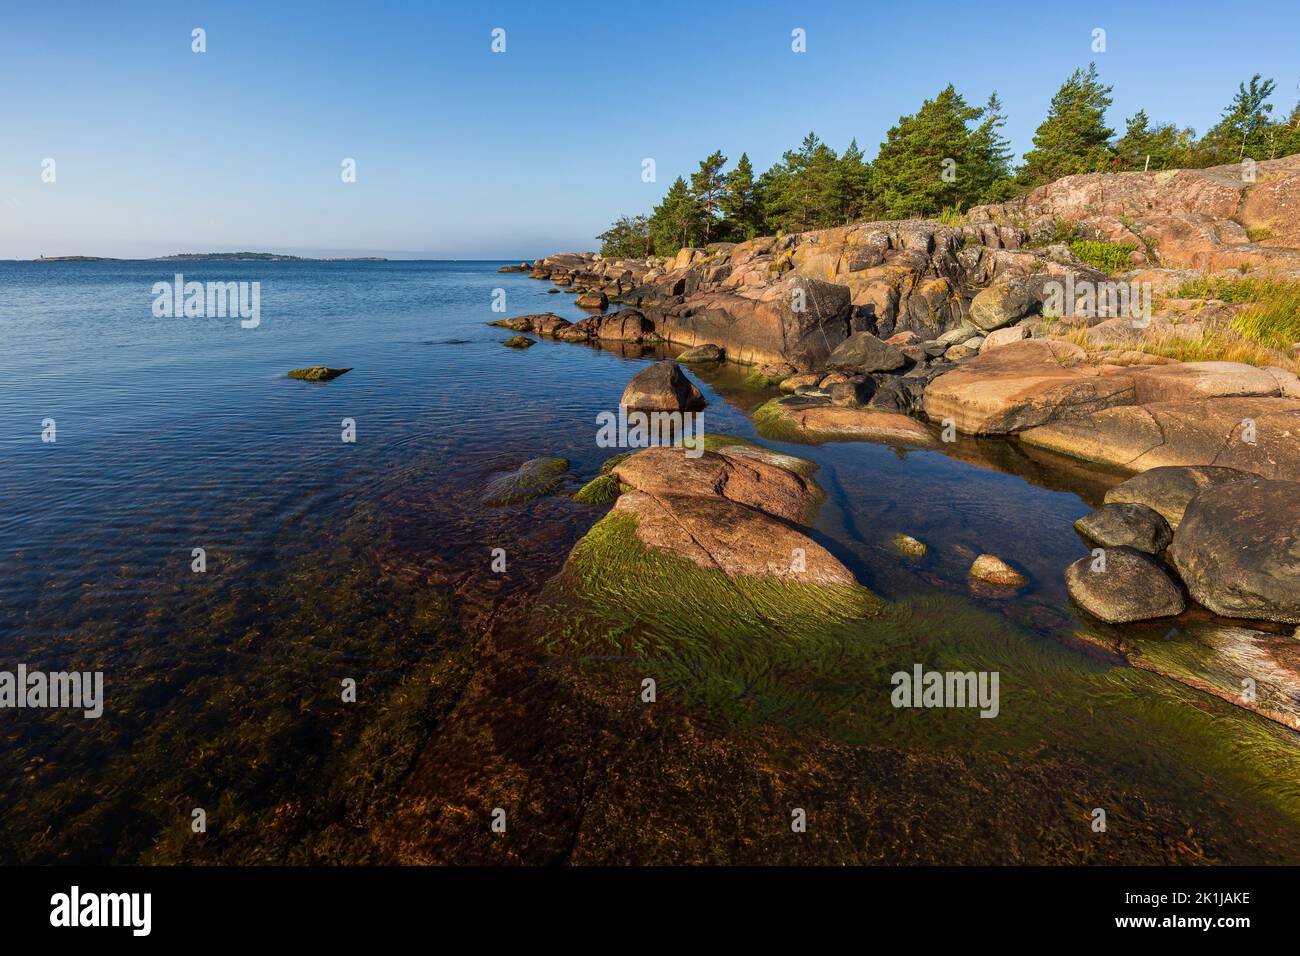 Rocky coastline and shoreline cliffs along the Tulliniemi nature trail leading to the southernmost point of Finnish mainland in Hanko, Finland. Stock Photo